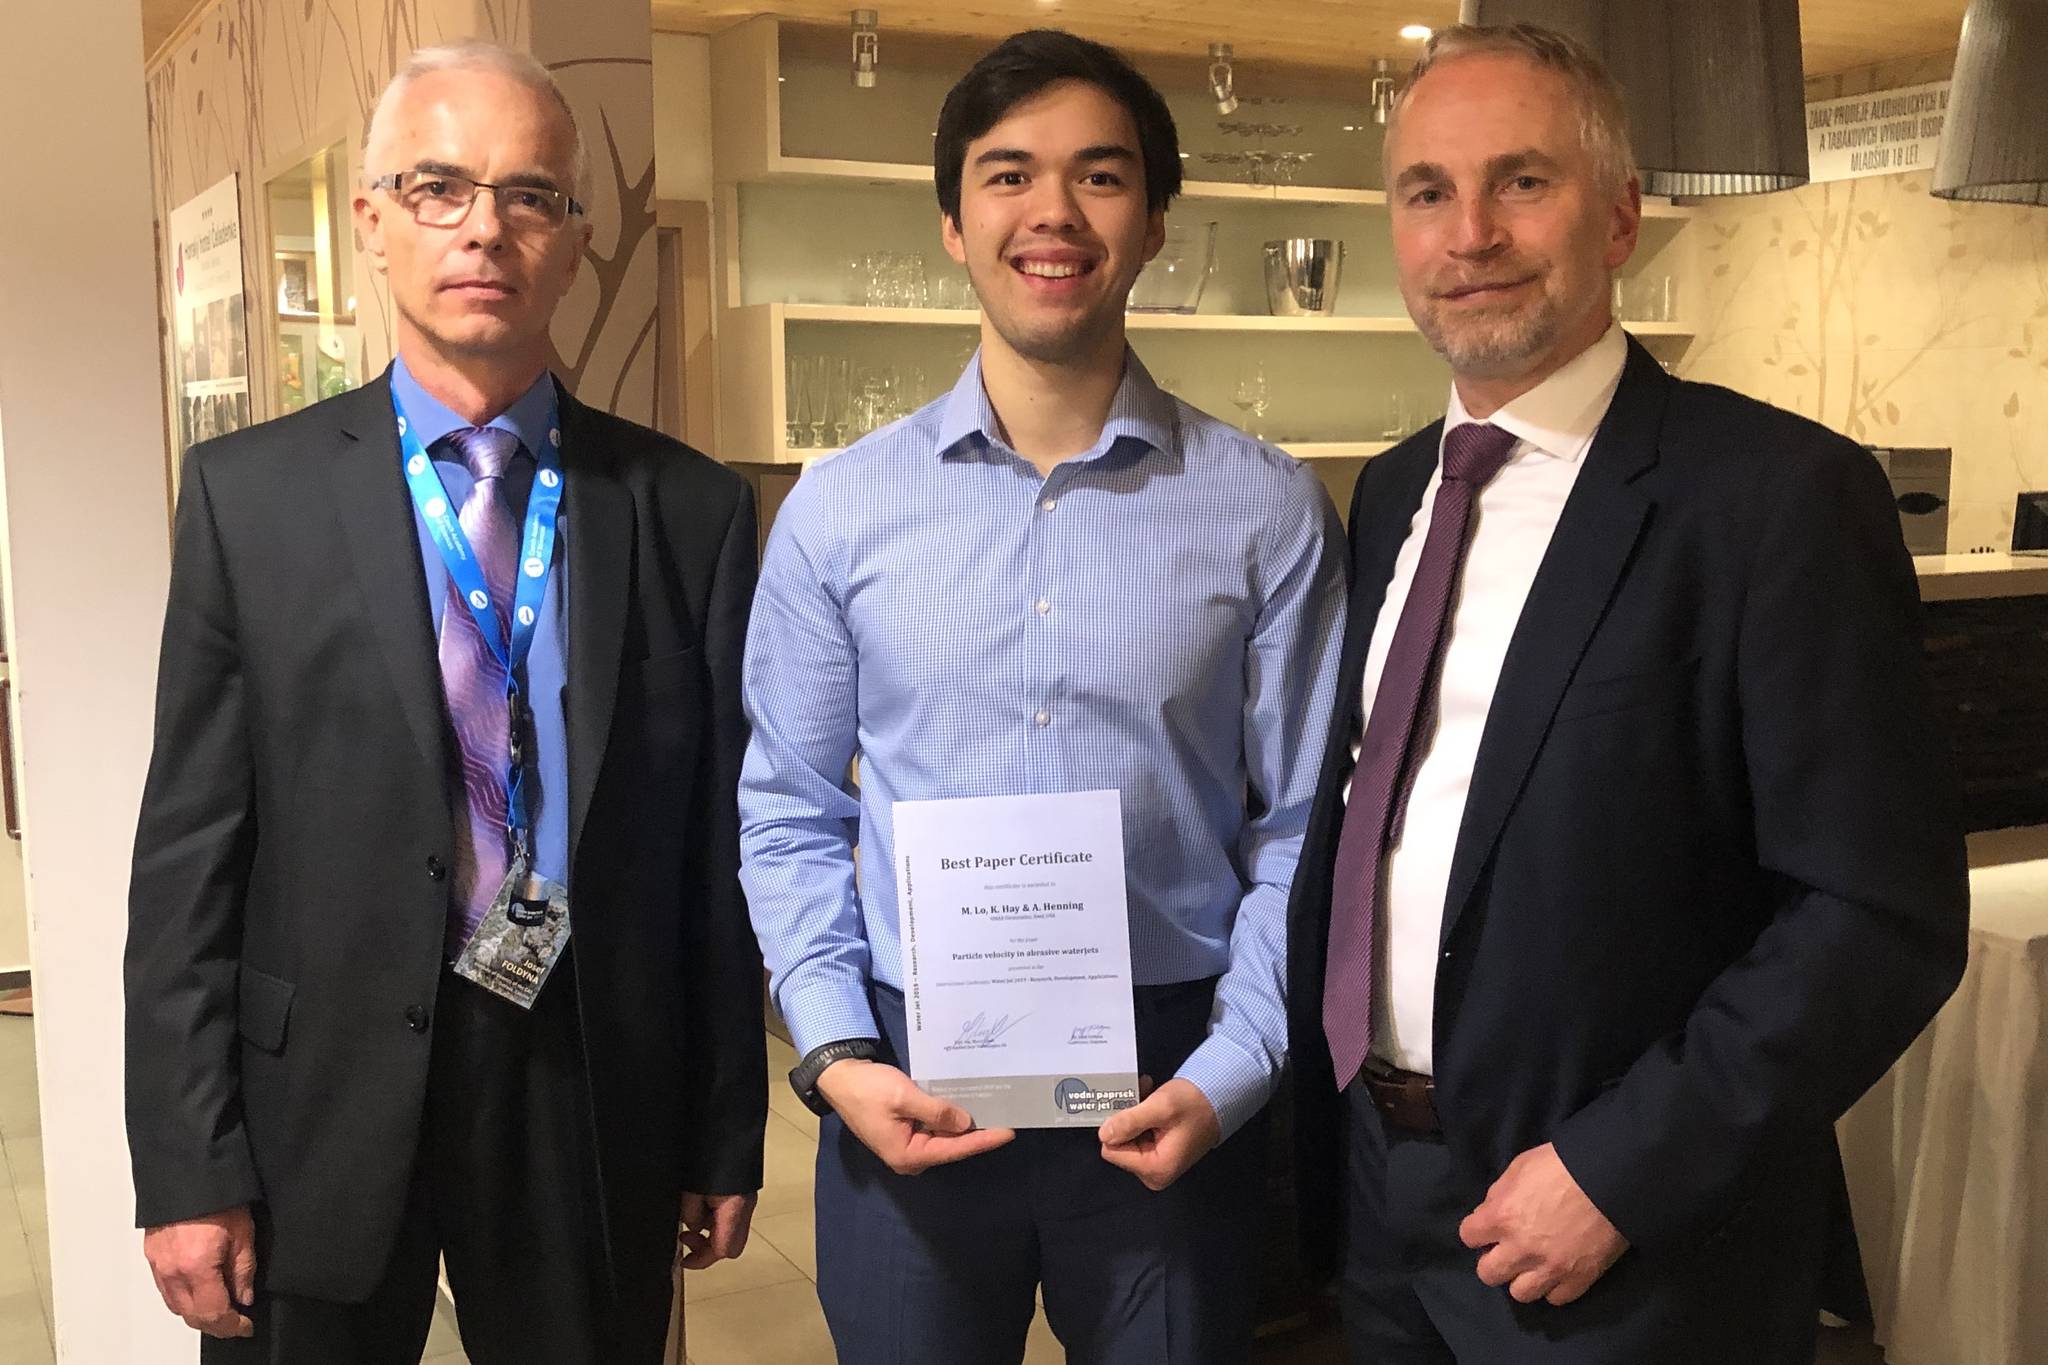 OMAX trio selected for Best Paper at Water Jet 2019 Conference